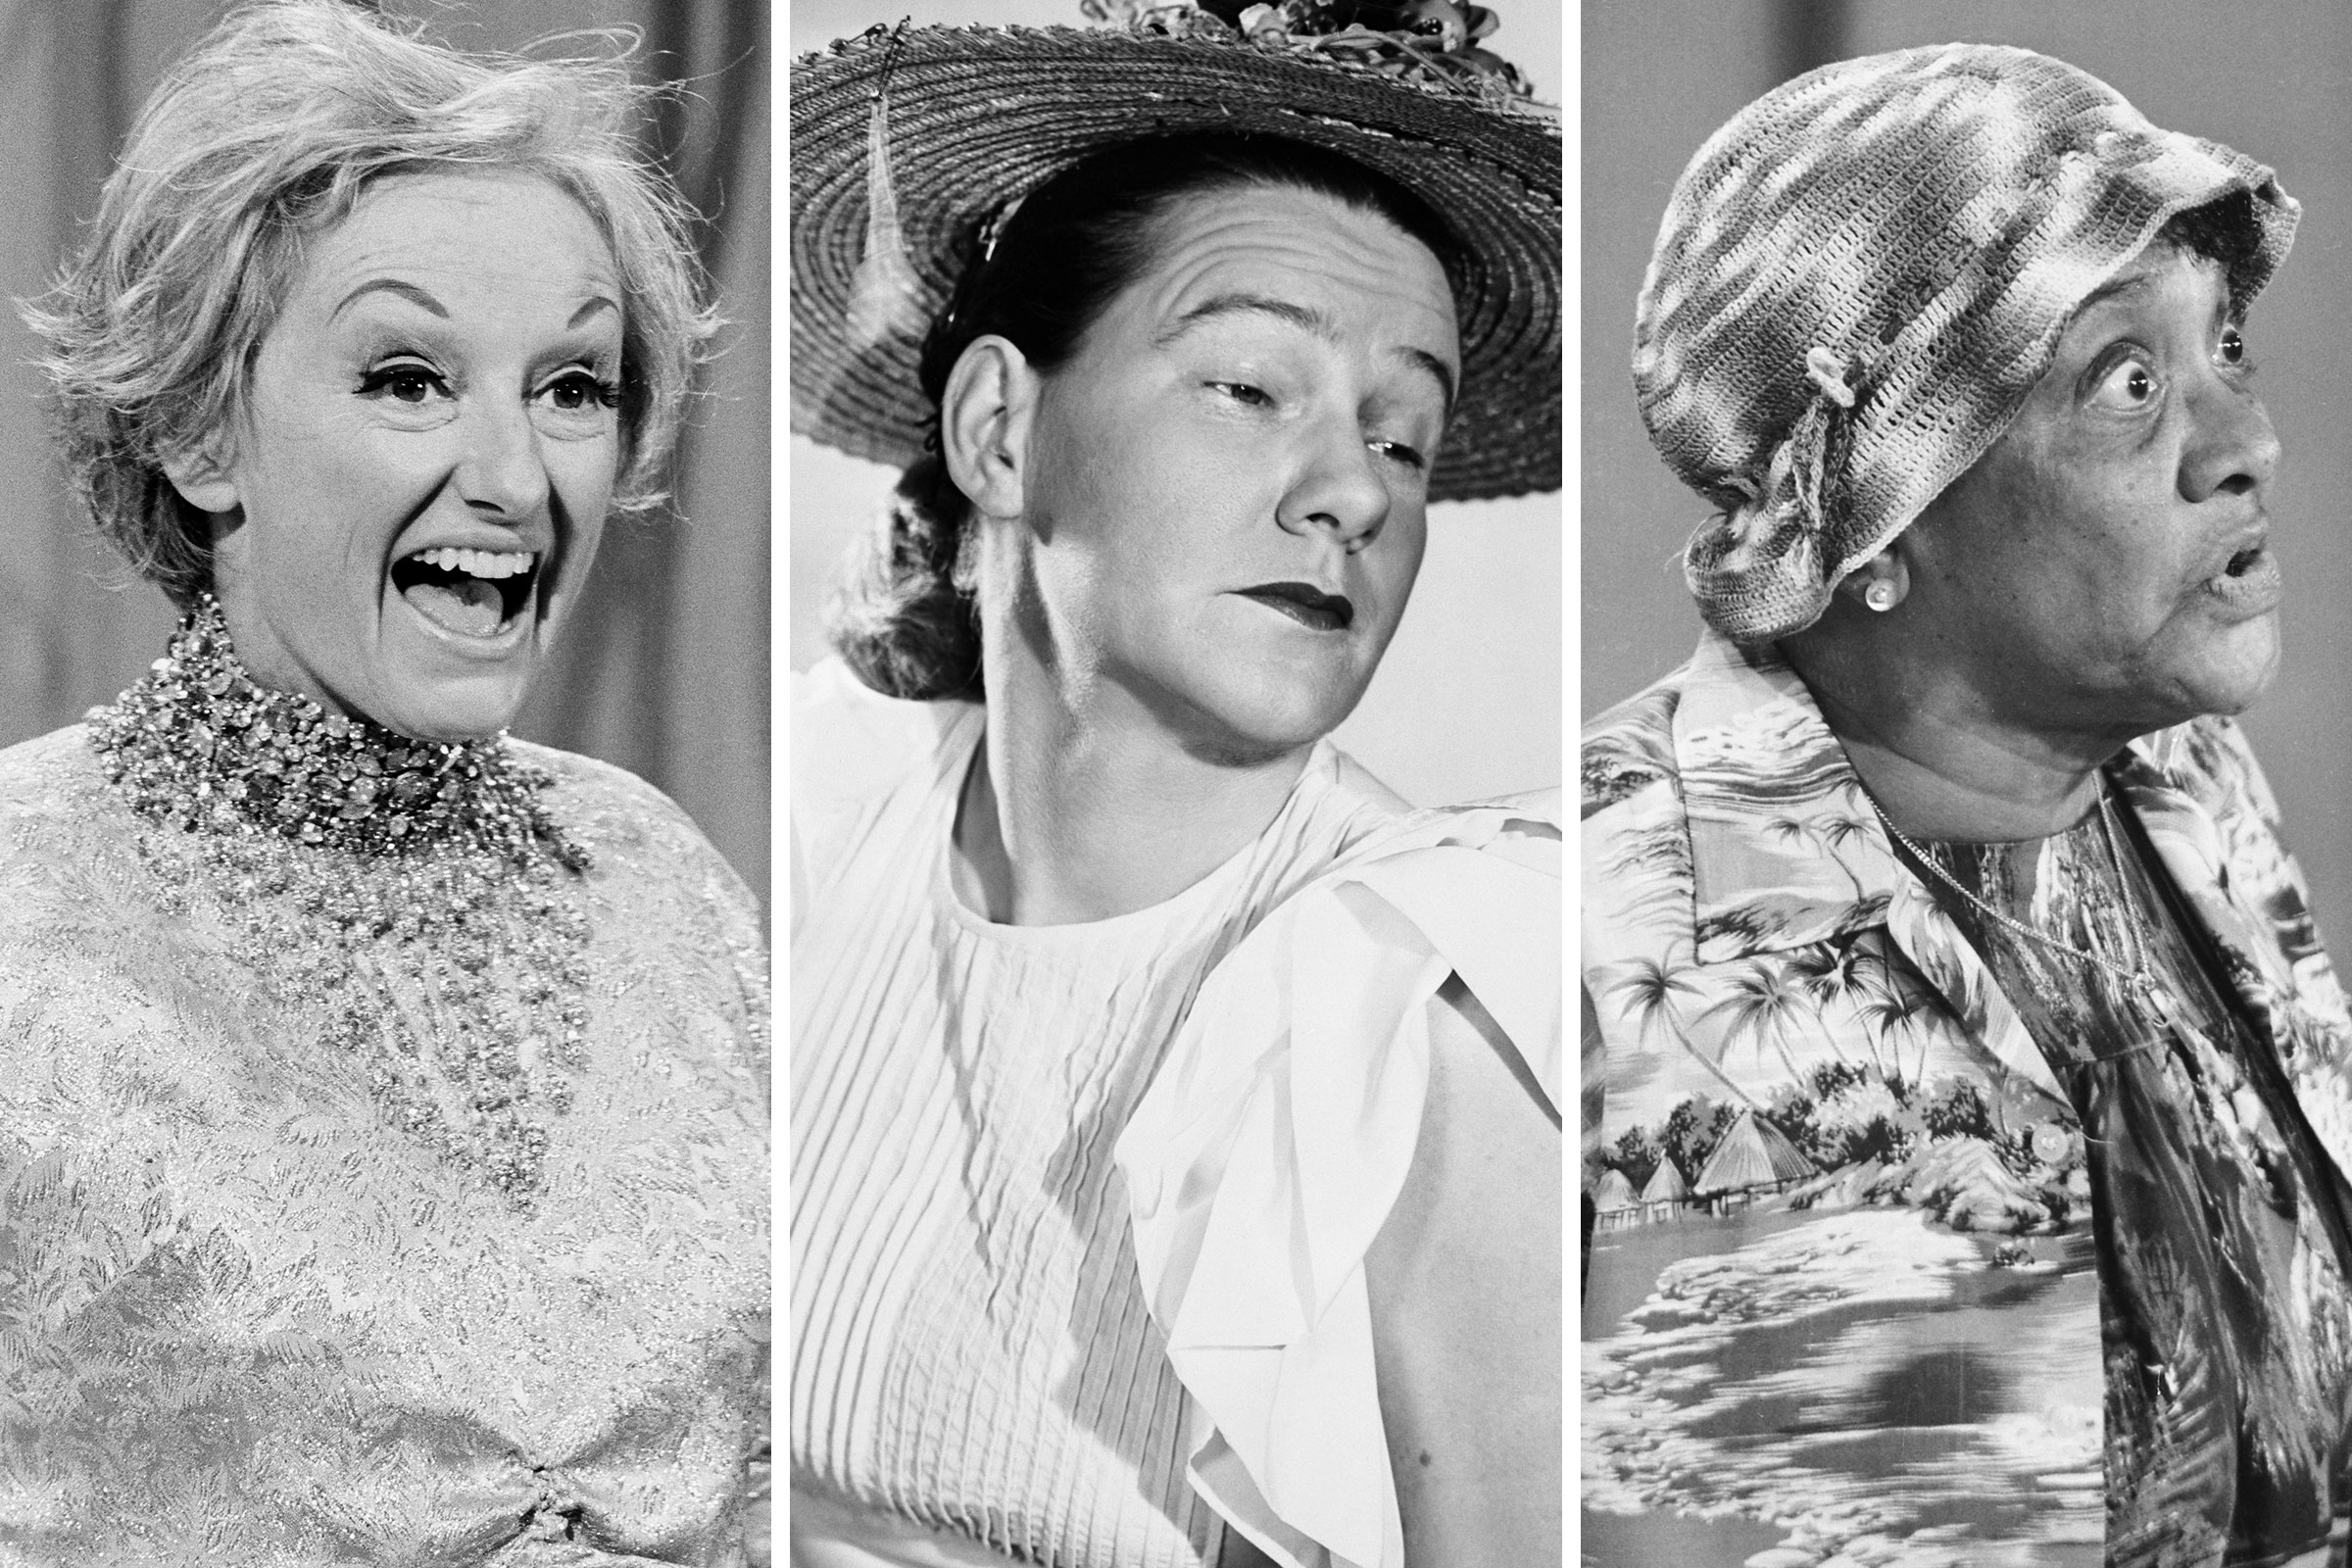 Phyllis Diller; Minnie Pearl; Jackie Mabley (NBCUniversal/Getty Images; Bettmann Archive/Getty Images; CBS/Getty Images)